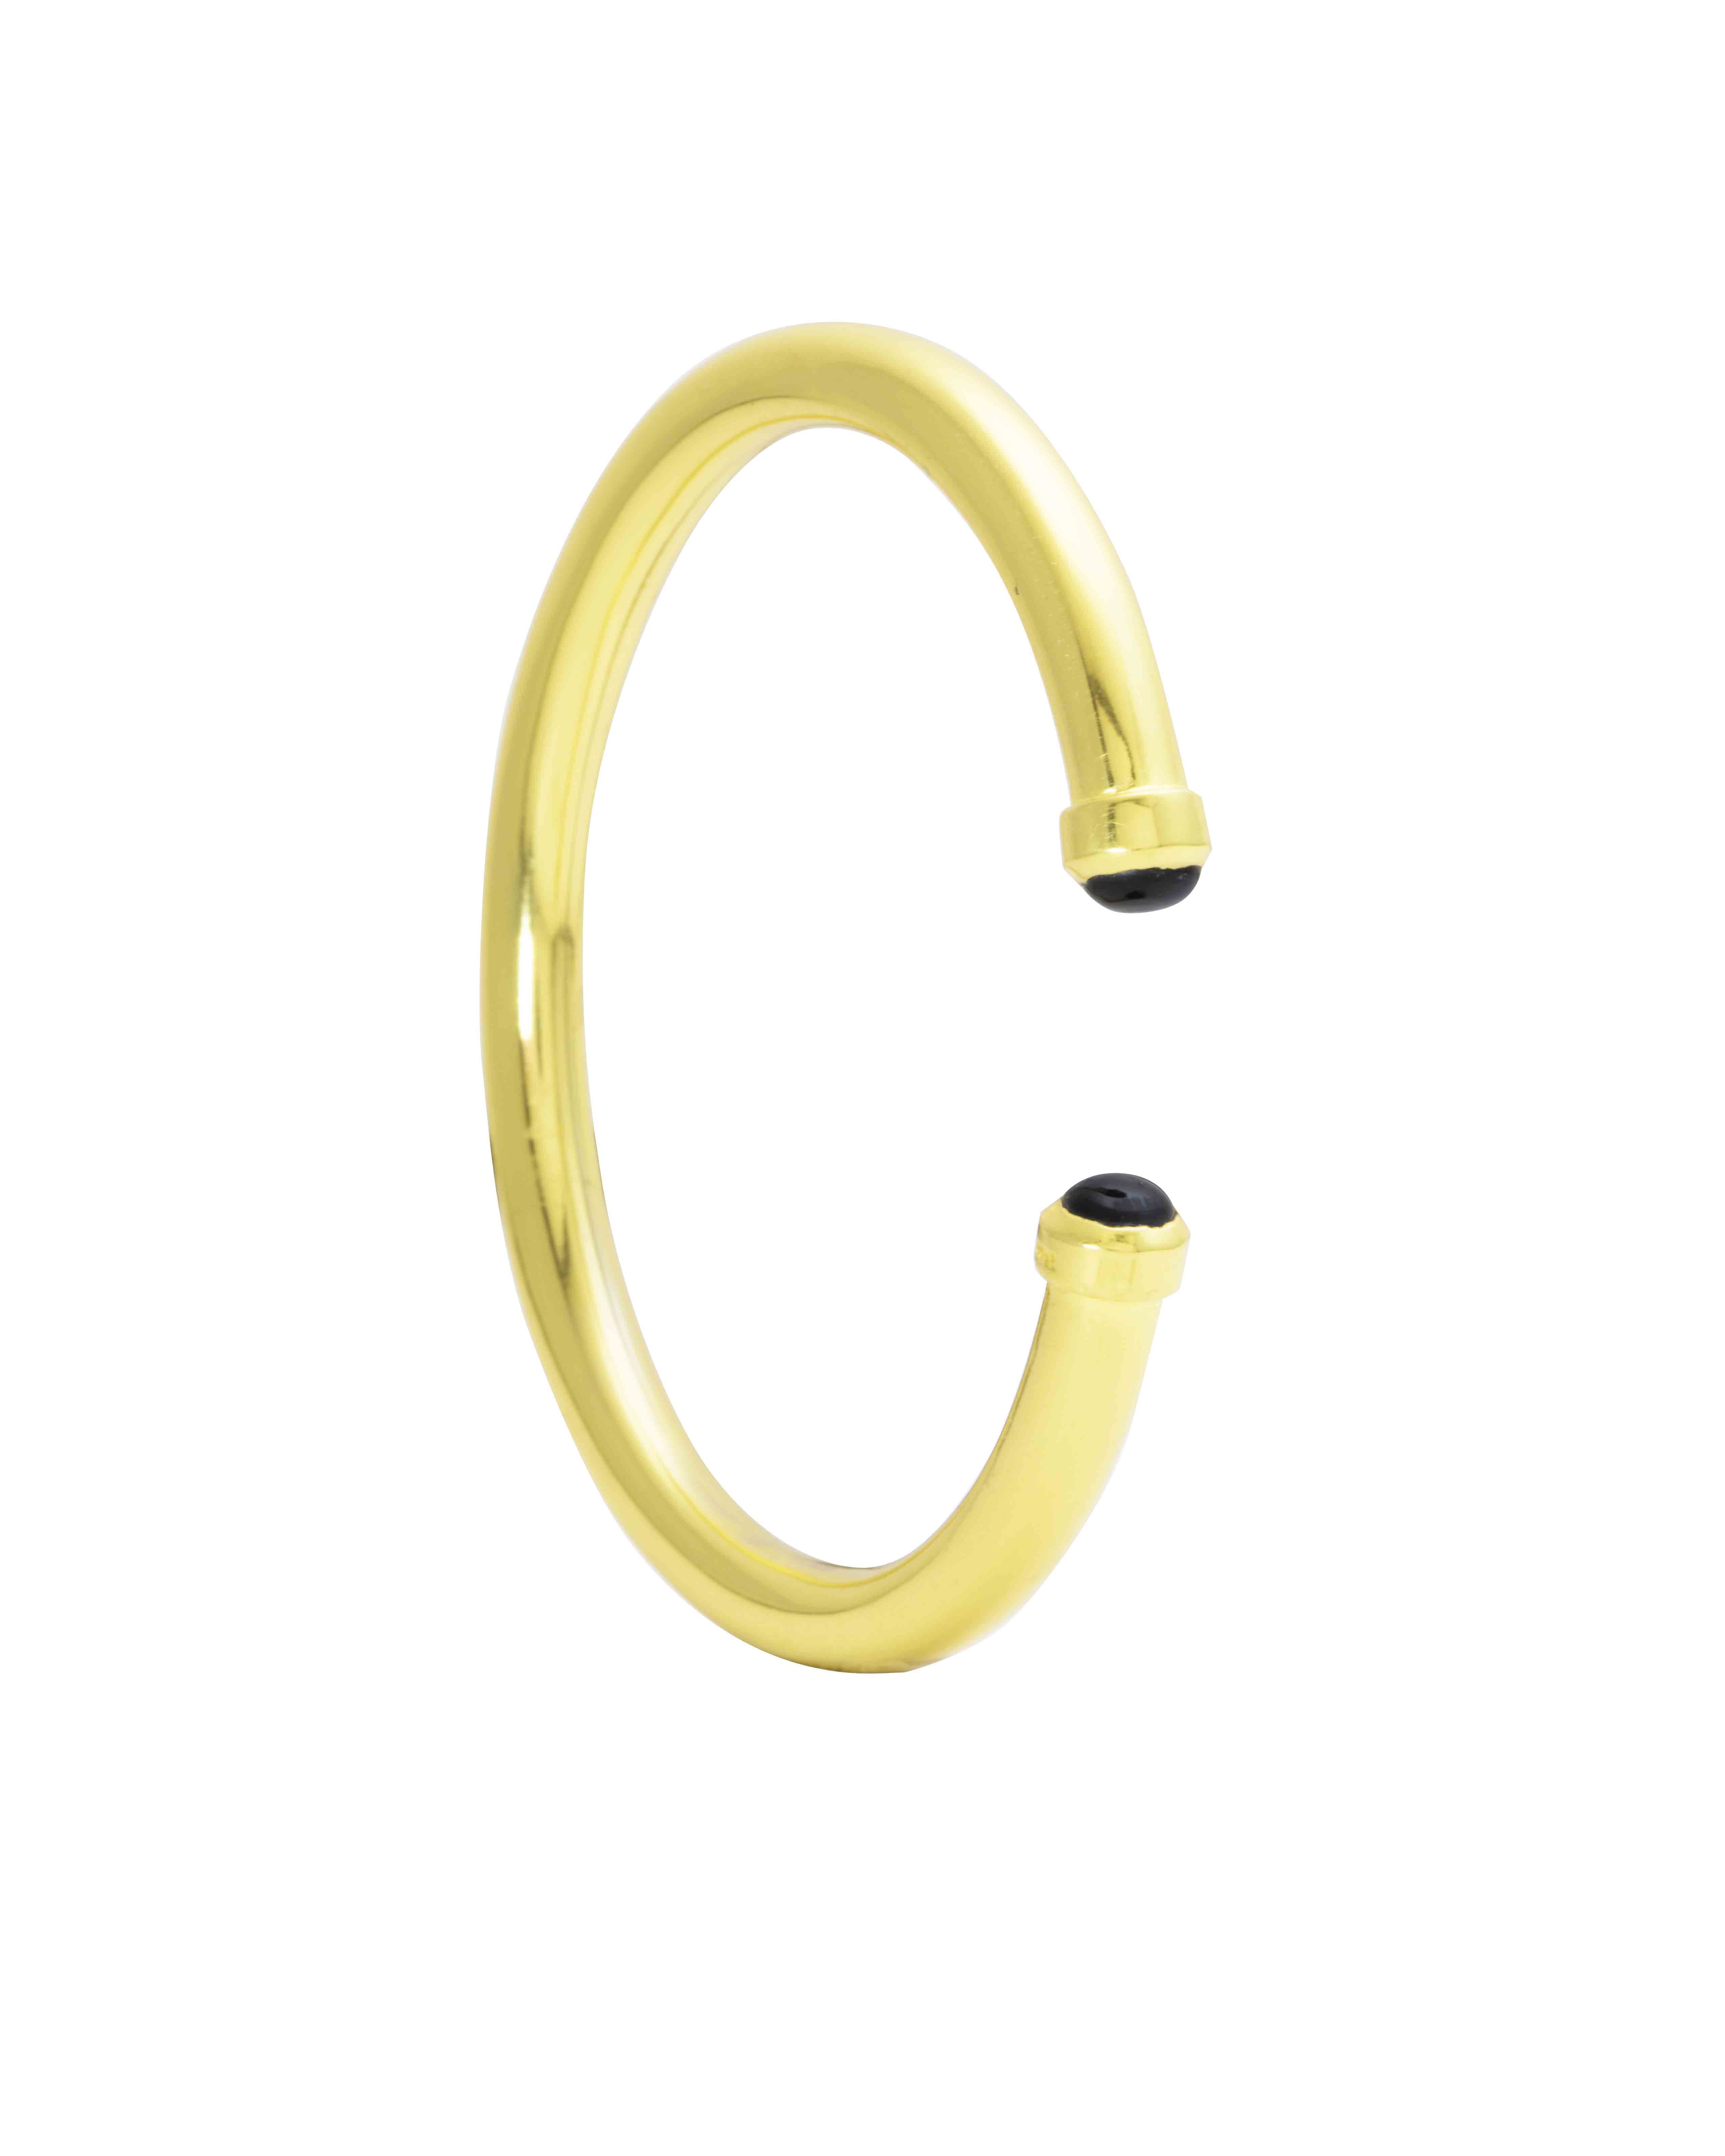 THE BROWNHOUSE INTERIORS Yellow Gold Twist Bangle with Black Onyx Cabochon